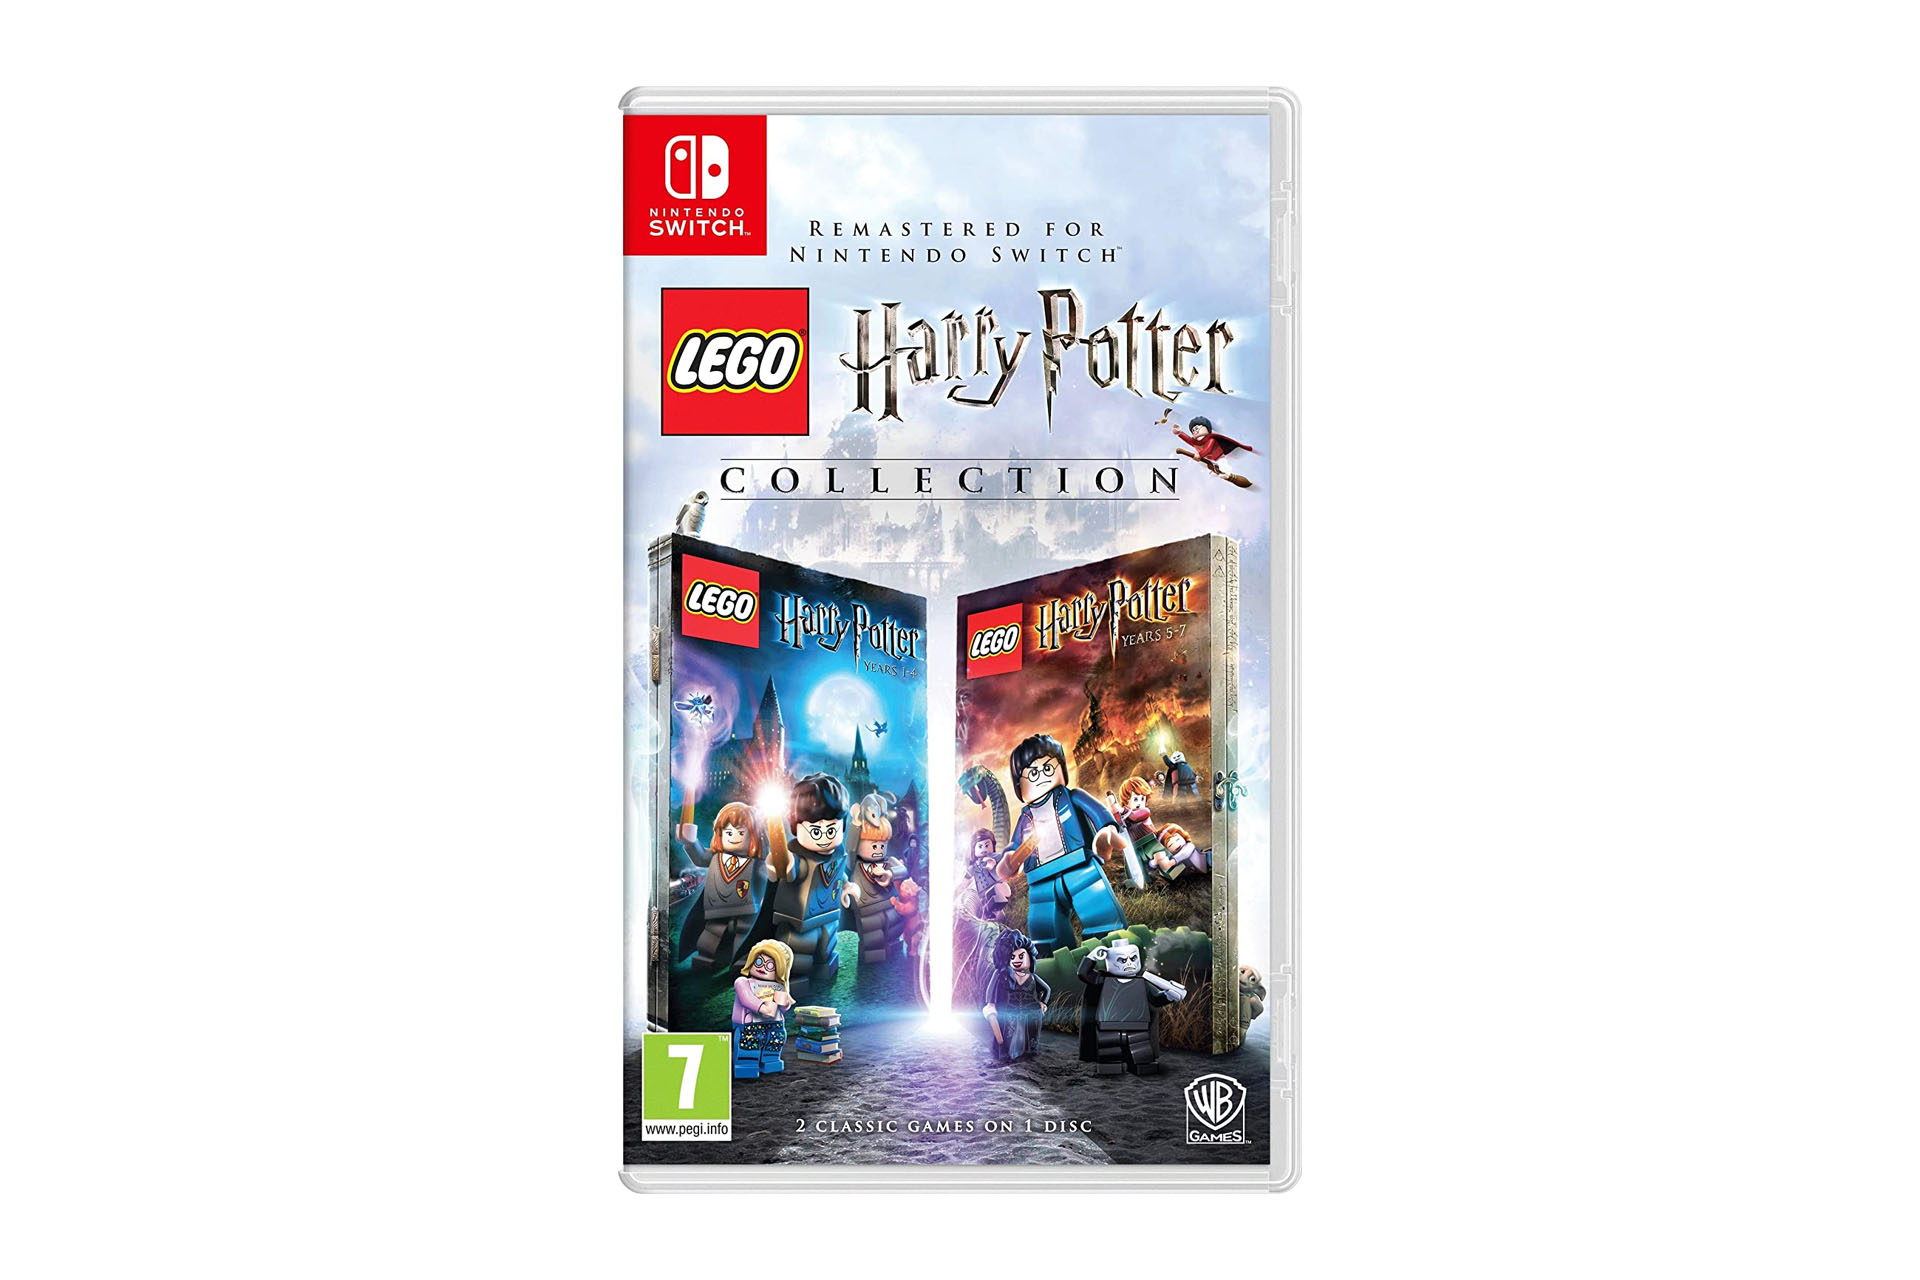 A product shot of Lego Harry Potter on Switch on a plain background